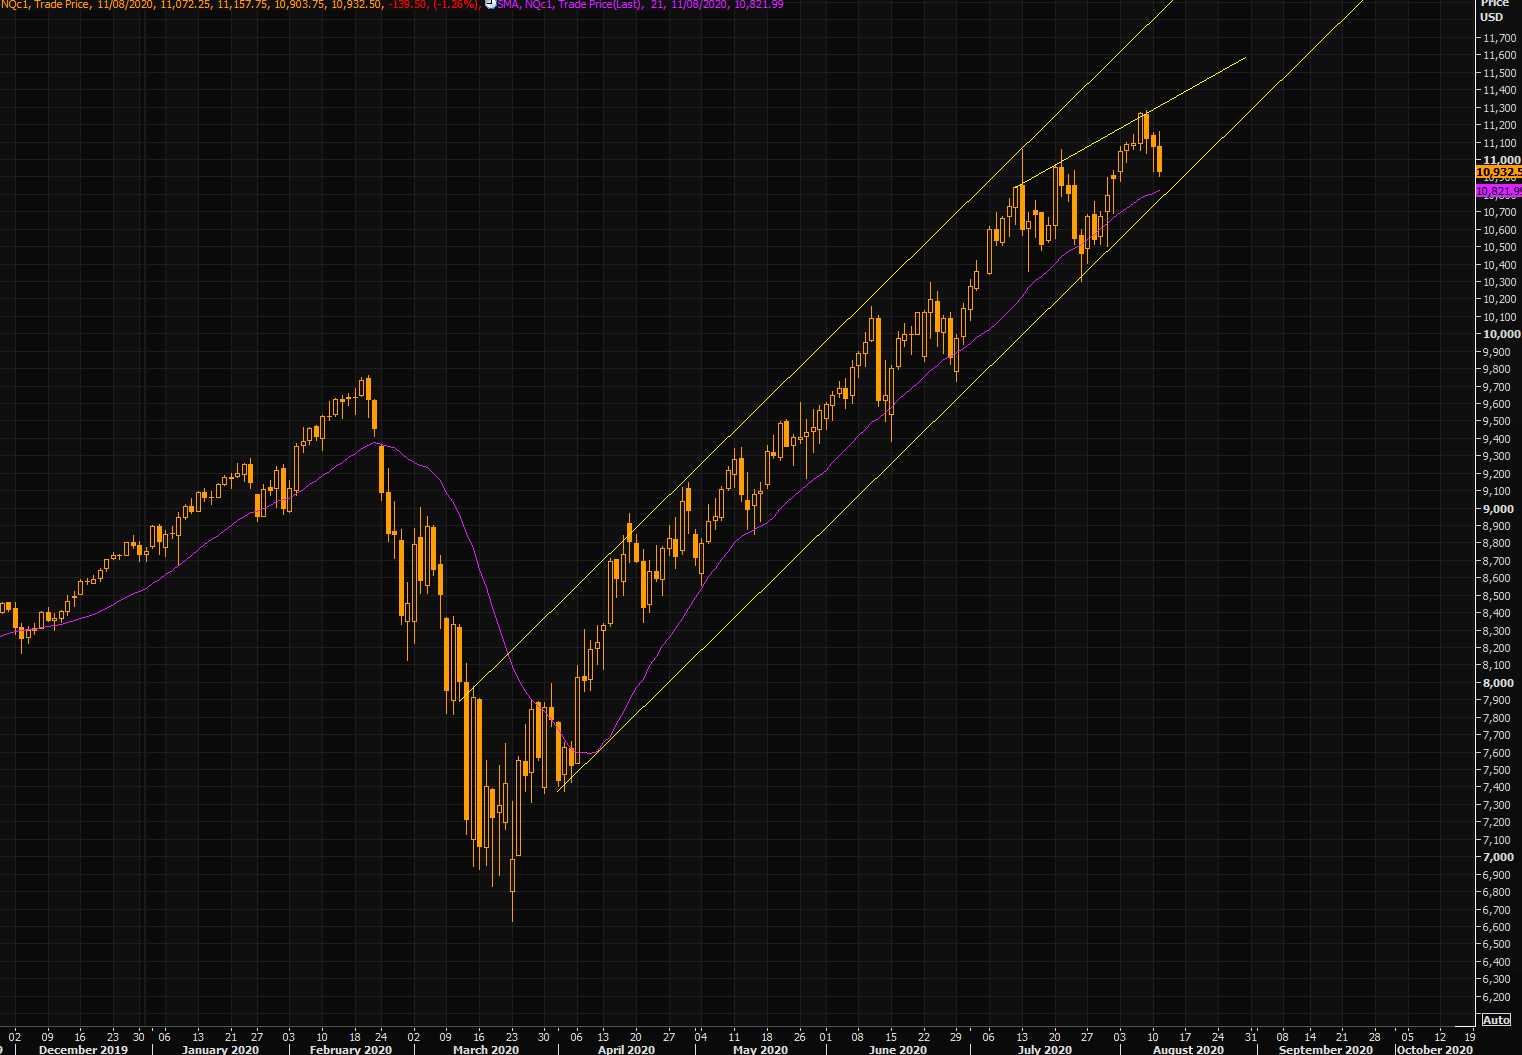 NASDAQ - time for watching that lower part of the trend channel and the 21 day moving average